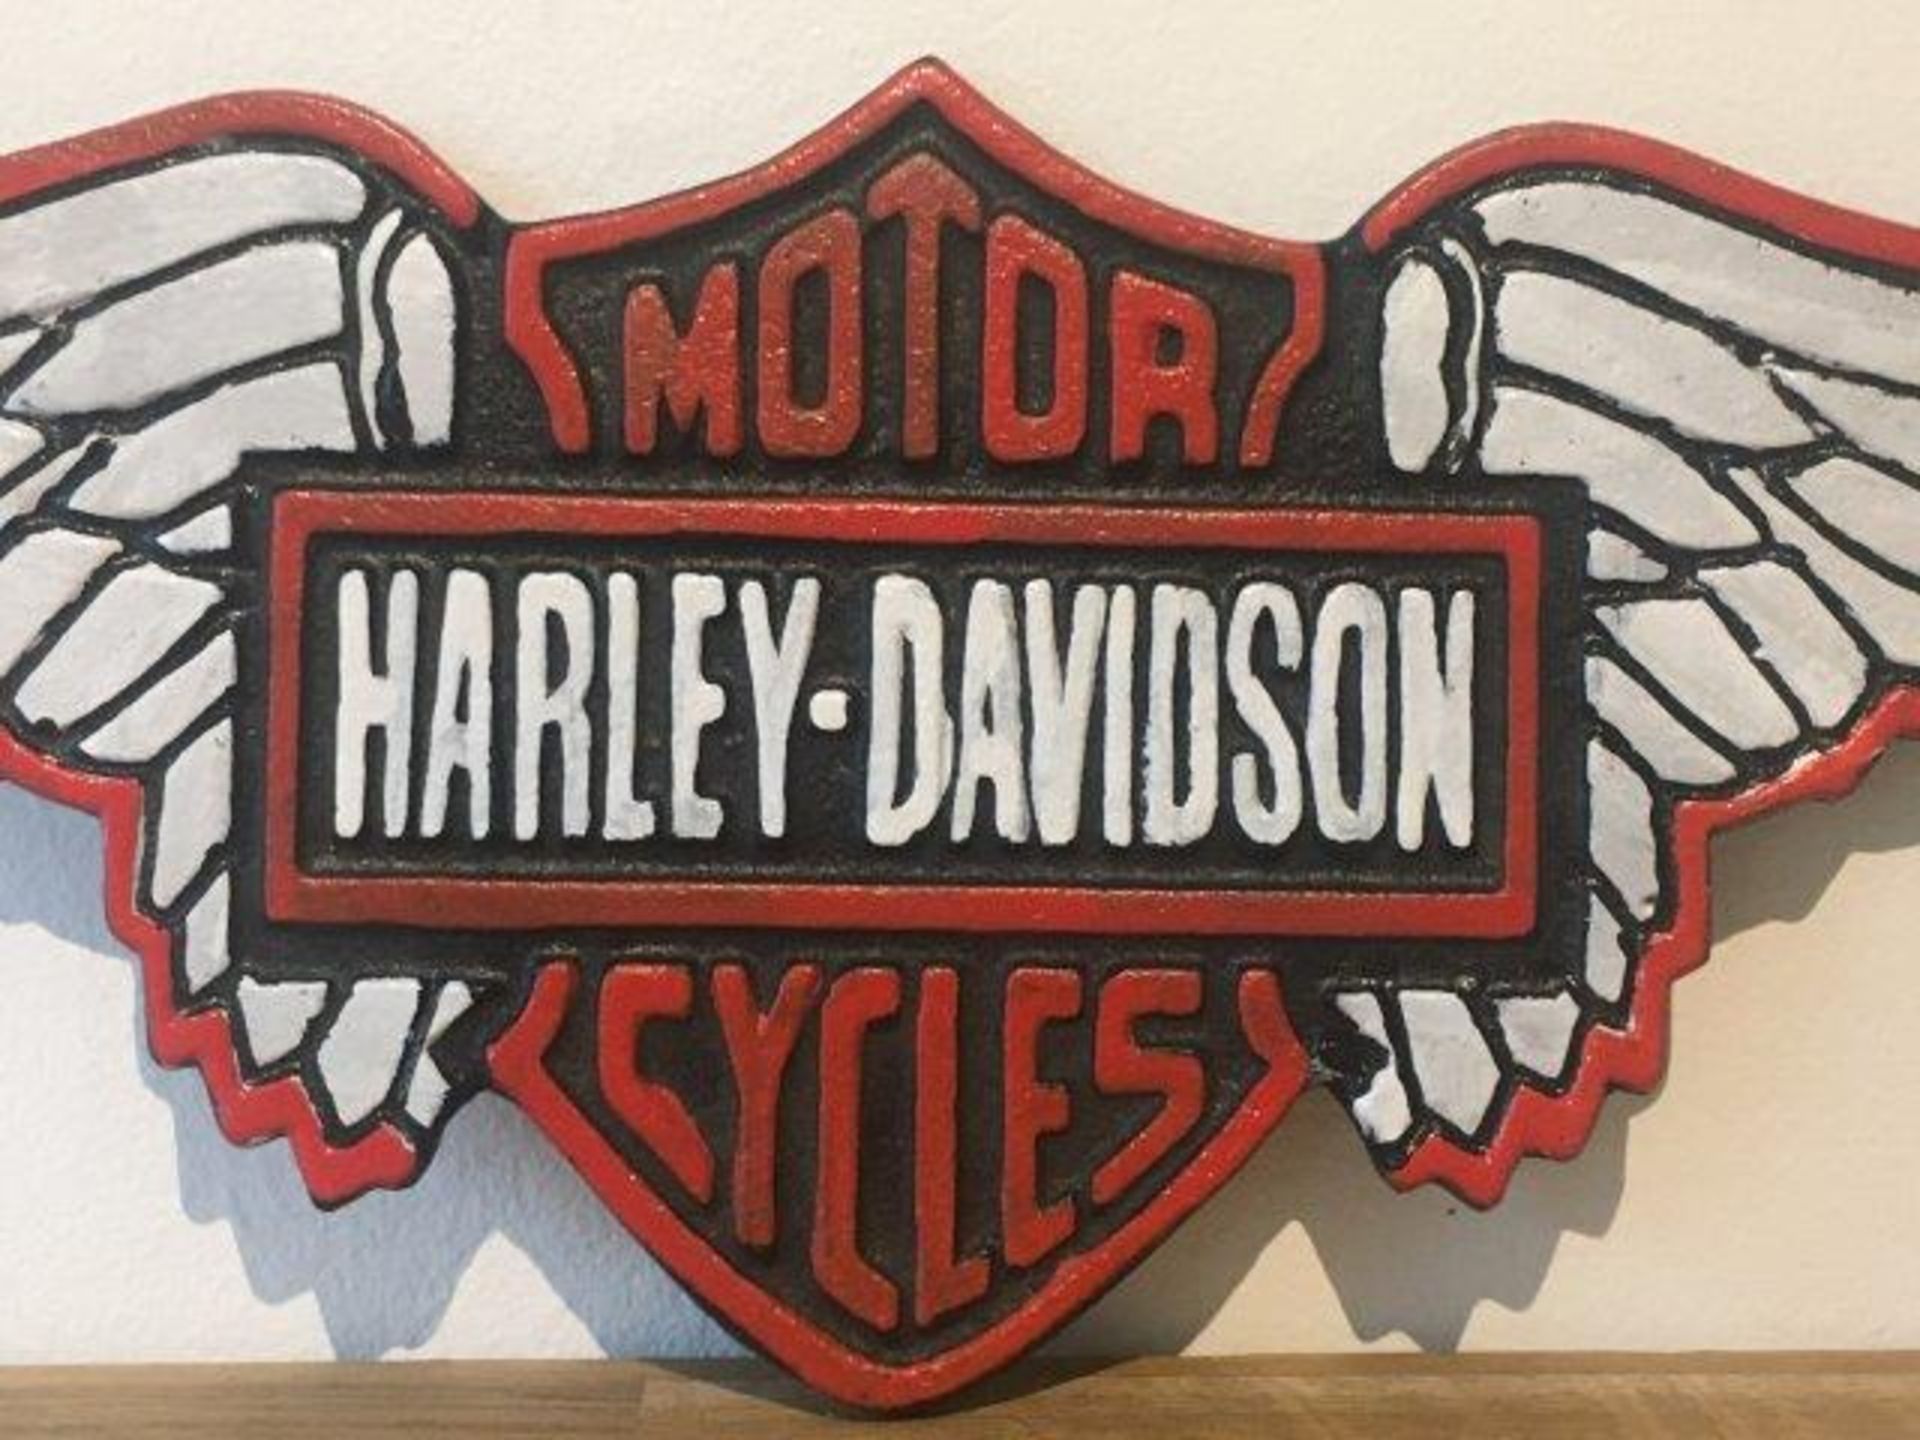 Harley Davidson Motorcycles Cast Iron Wing Sign - Image 2 of 4